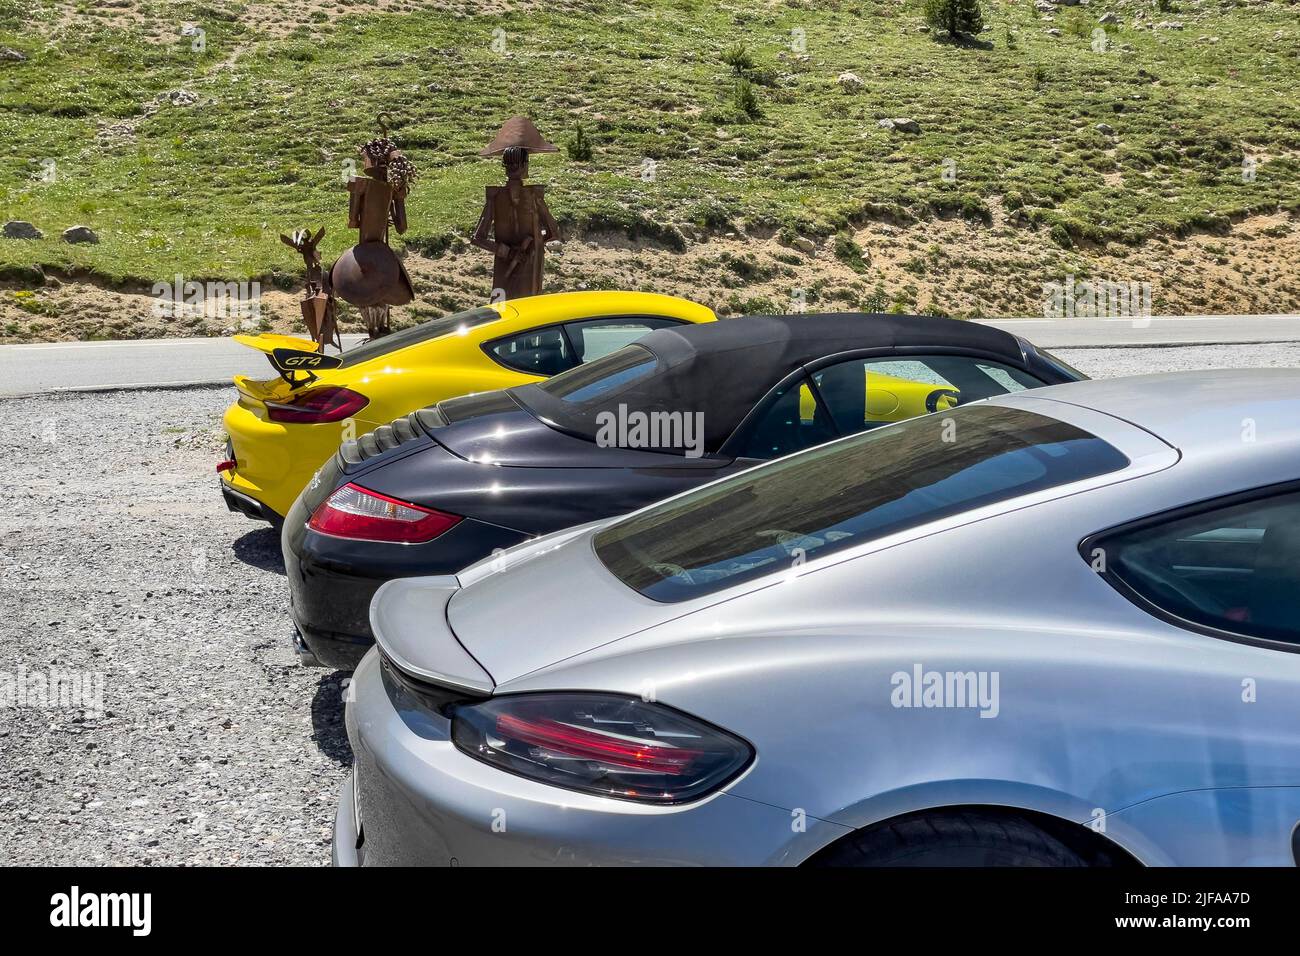 Rear of three sports cars, Porsche Cayman 981 in front, Porsche 911 997 in the middle, Porsche Cayman GT4 in the back, metal sculpture of Emperor Stock Photo